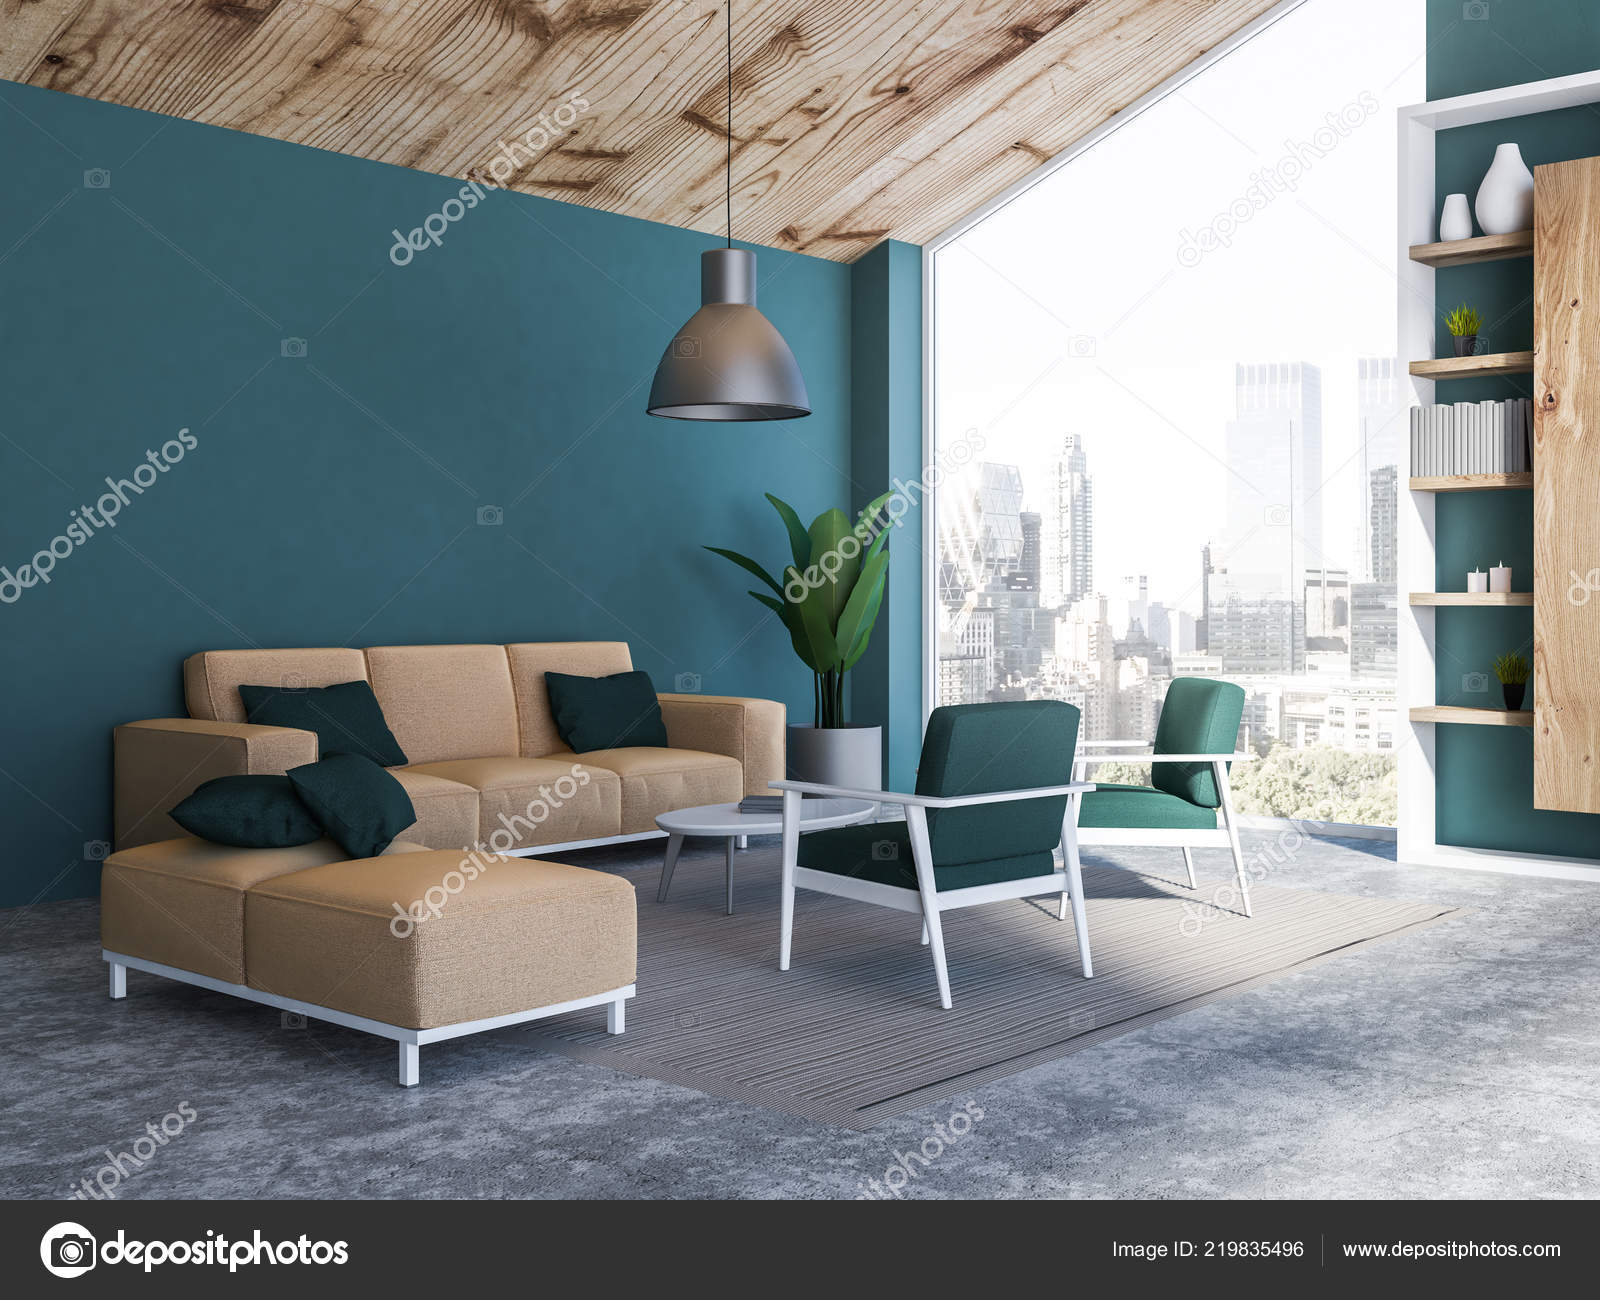 Interior Attic Living Room Green Walls Wooden Ceiling White